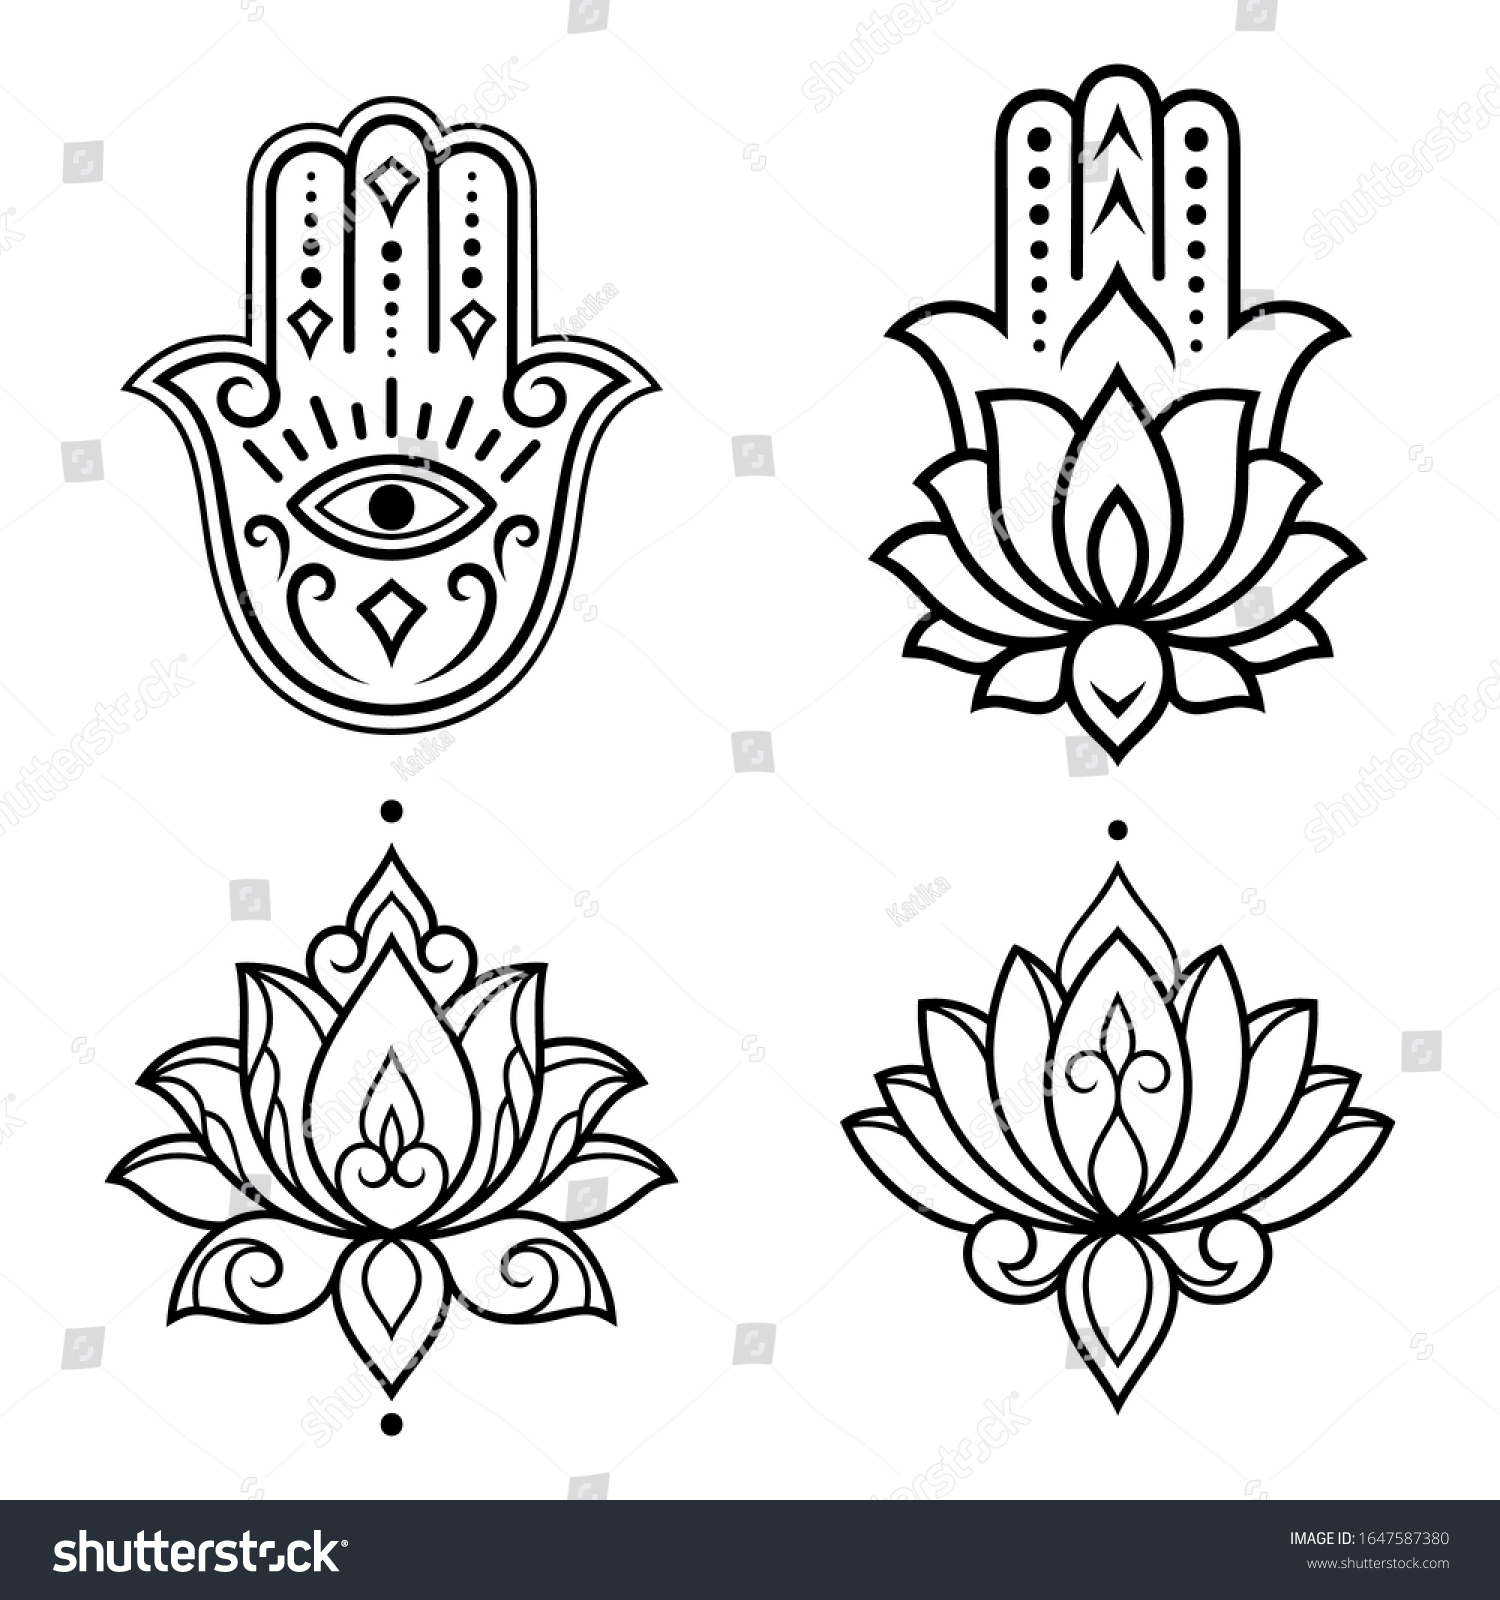 Set of Hamsa hand drawn symbol with lotus flower. Decorative pattern in oriental style for interior decoration and henna drawings. The ancient sign of "Hand of Fatima". #1647587380